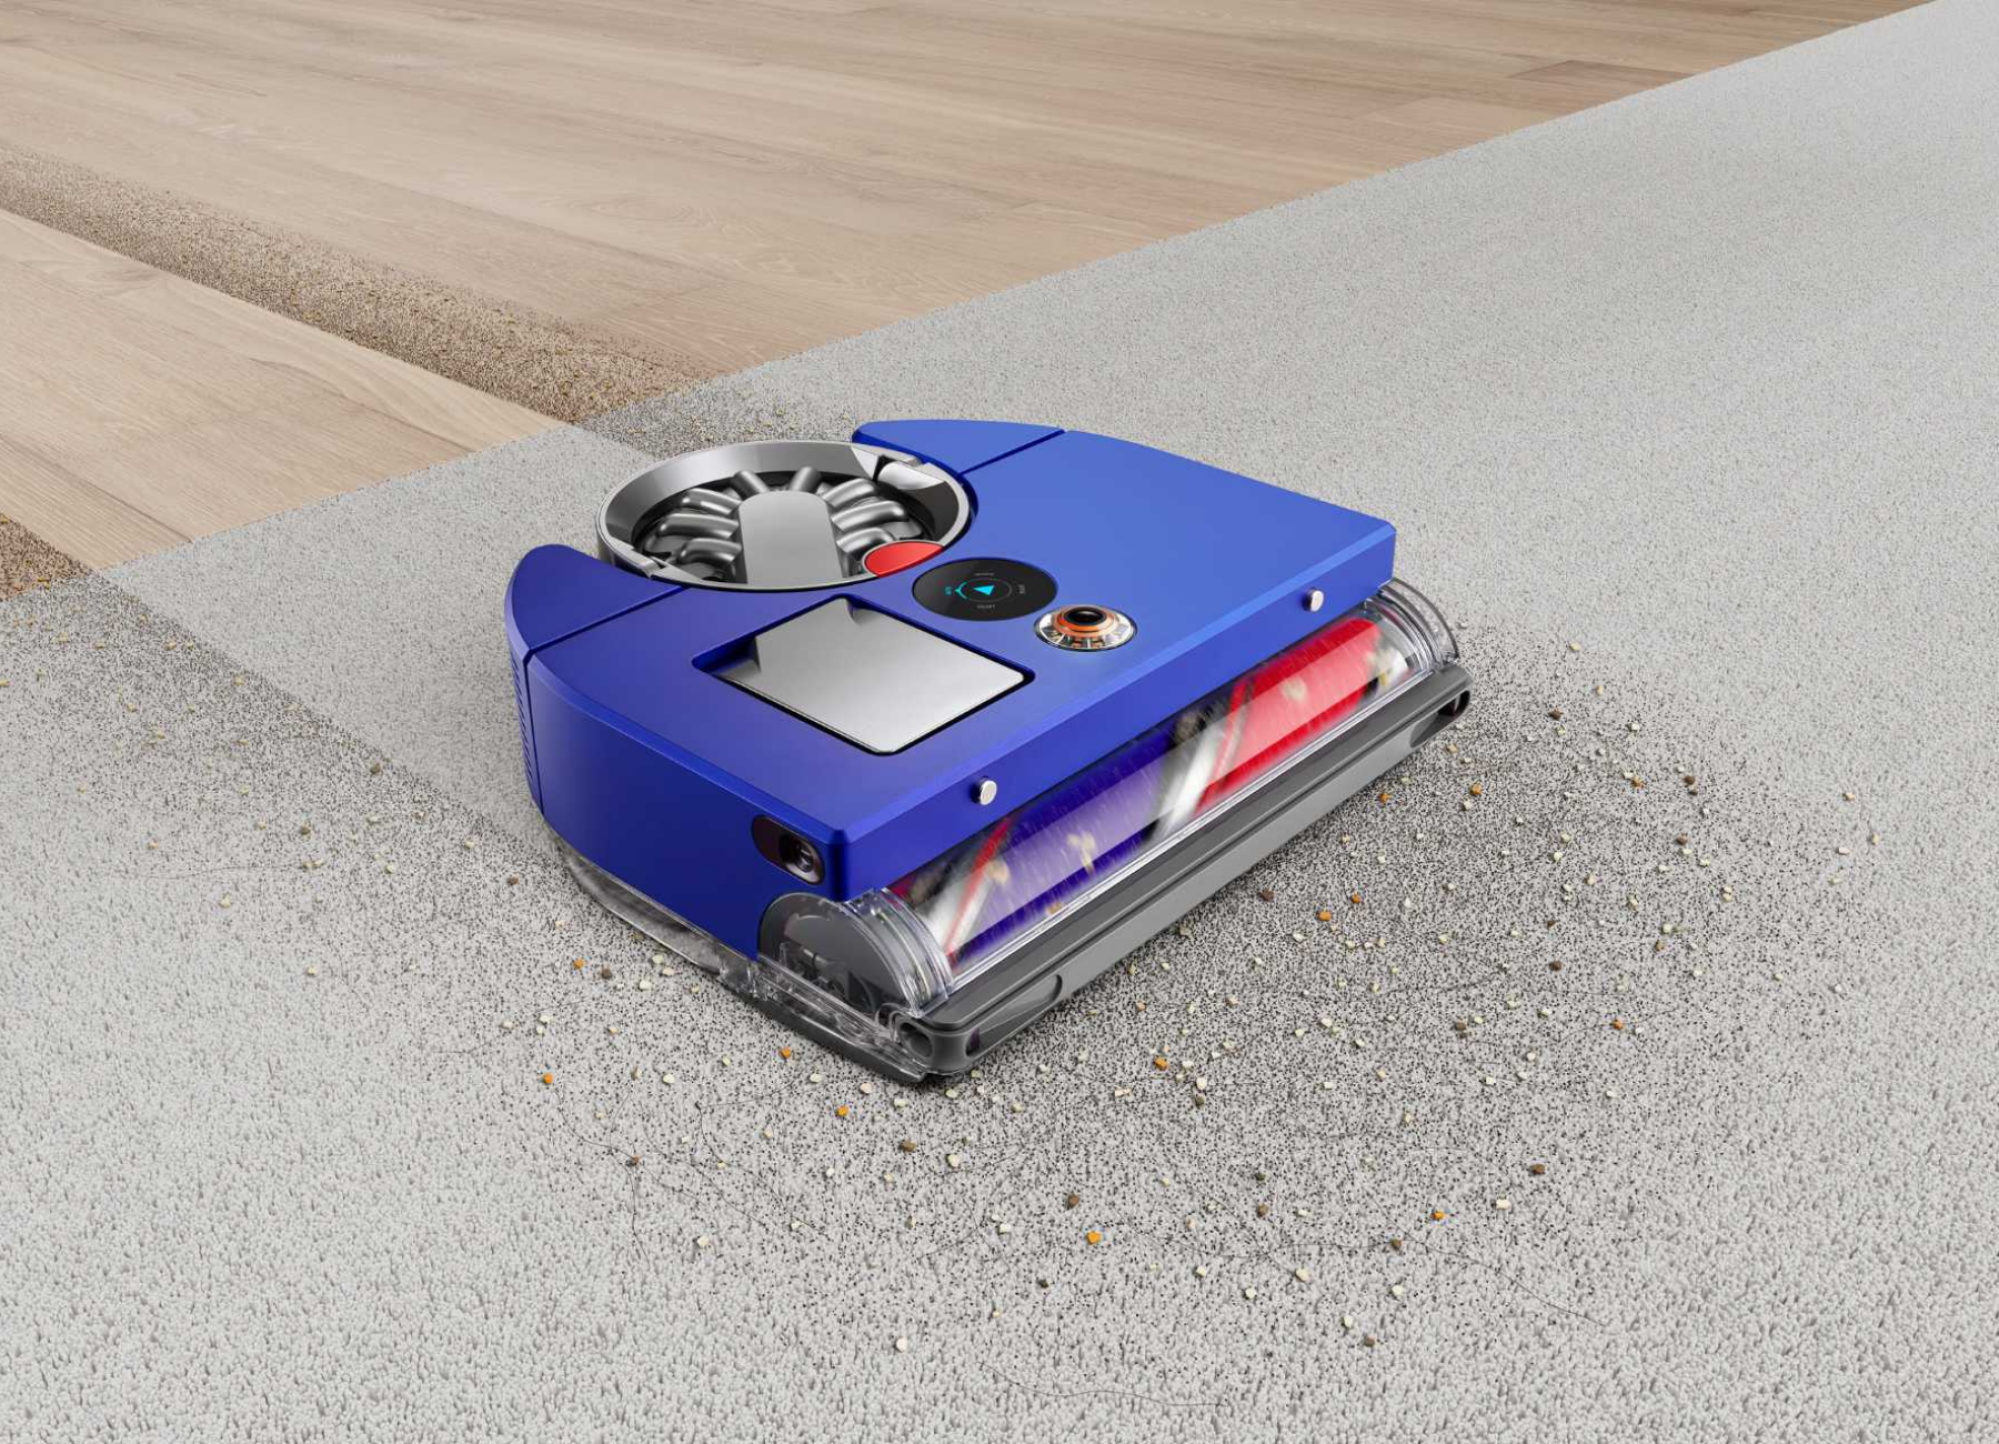 Dyson robot vacuum cleaning carpet and hardwood floor